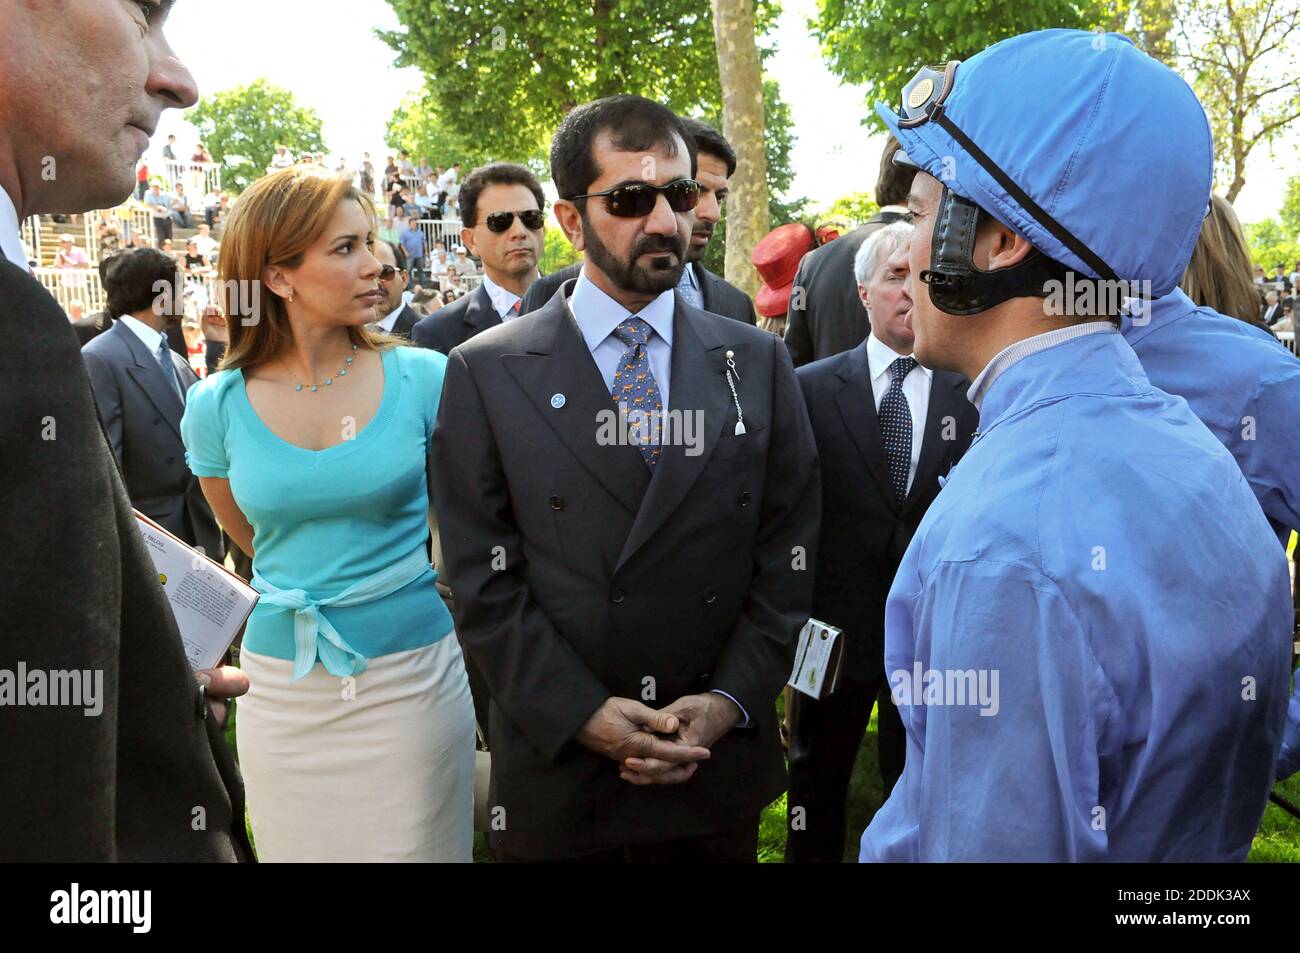 File photo - Jordan's Princess Haya and her husband, Dubai's ruler, Sheikh Mohammed Bin Rashed Al Maktoum talk with Italian jockey Lanfranco 'Frankie' Dettori as they attend colts race, known as 'Poule d'Essai des Poulains' at Longchamp racecourse in Paris, France, on May 11, 2008. The younger wife of the ruler of Dubai, the billionaire race horse owner Sheikh Mohammed bin Rashid al-Maktoum, is believed to be staying in a town house near Kensington Palace after fleeing her marriage. Princess Haya bint al-Hussein, 45, has not been seen in public for weeks. One half of one of the sporting world’ Stock Photo